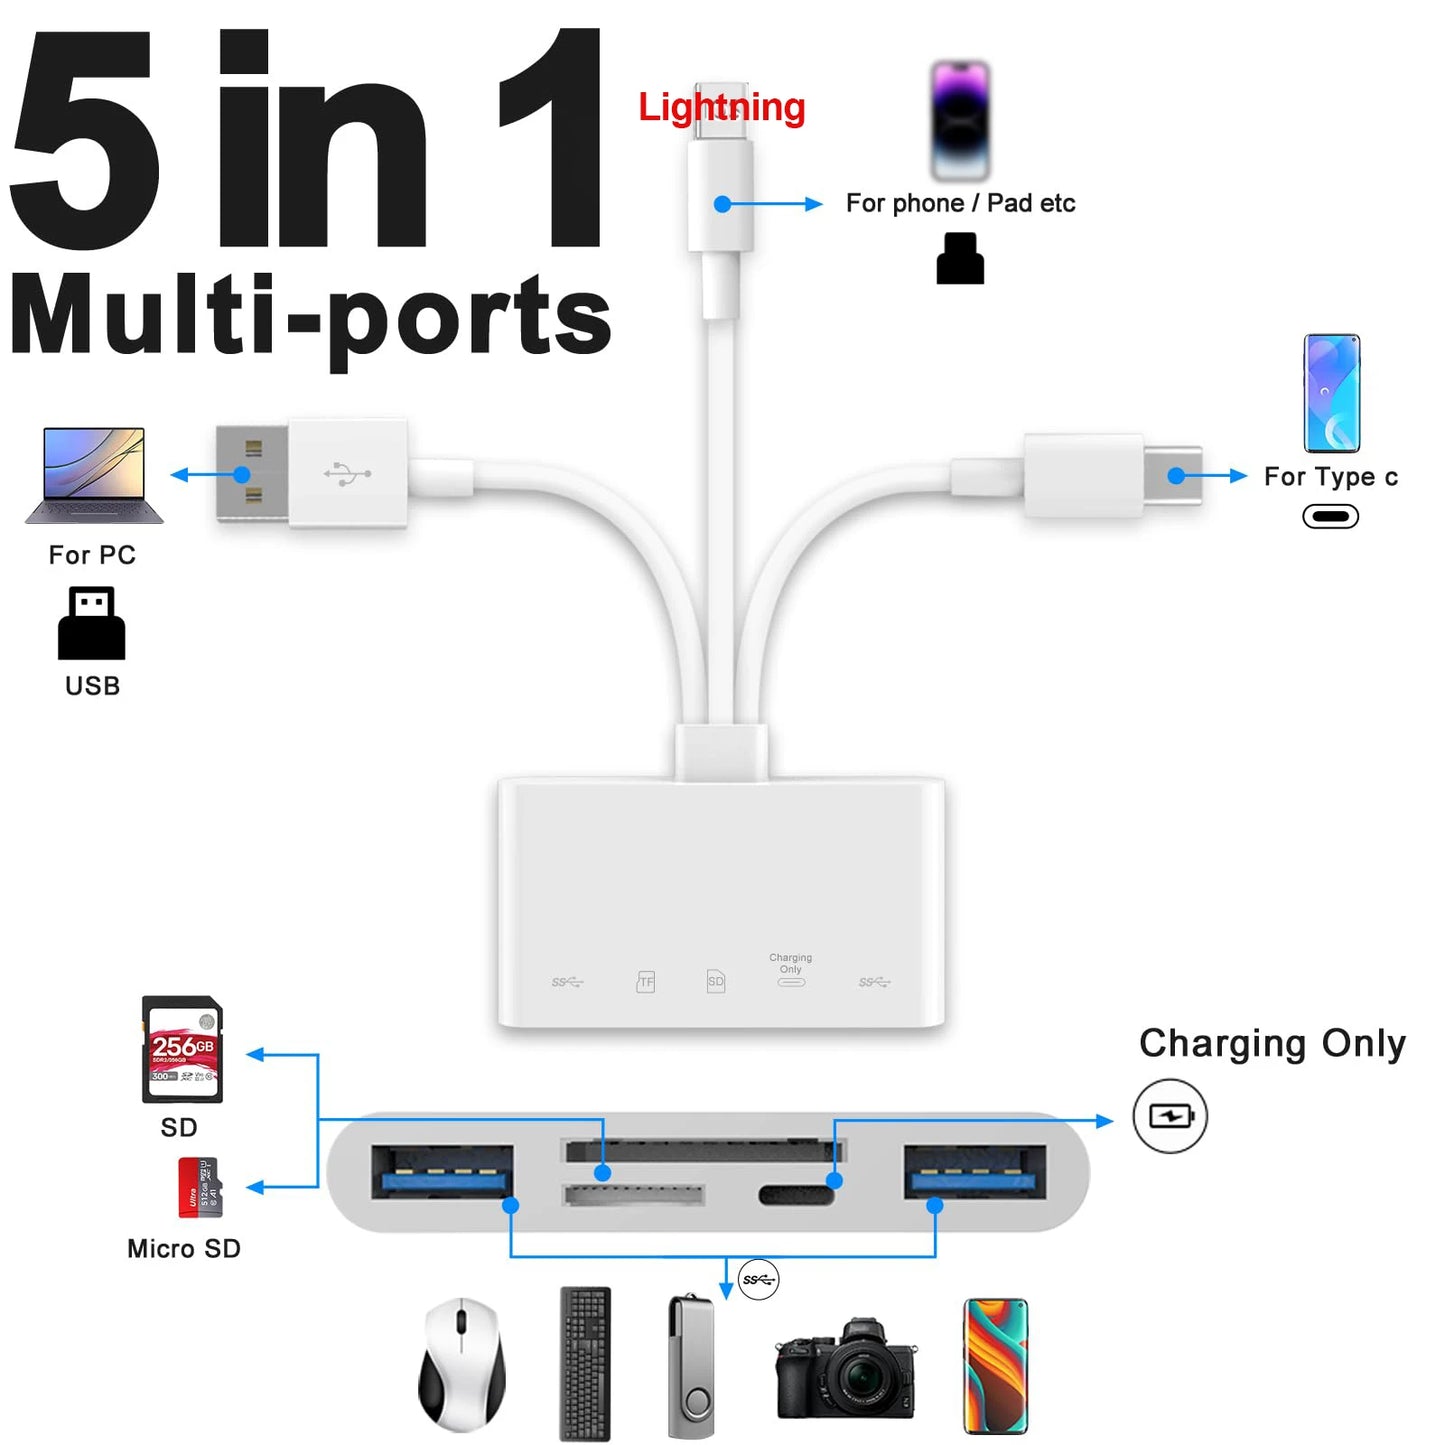 5 in 1 USB OTG Adapter with Charging Port for iPhone iPad Xiaomi Samsung Huawei MacBook